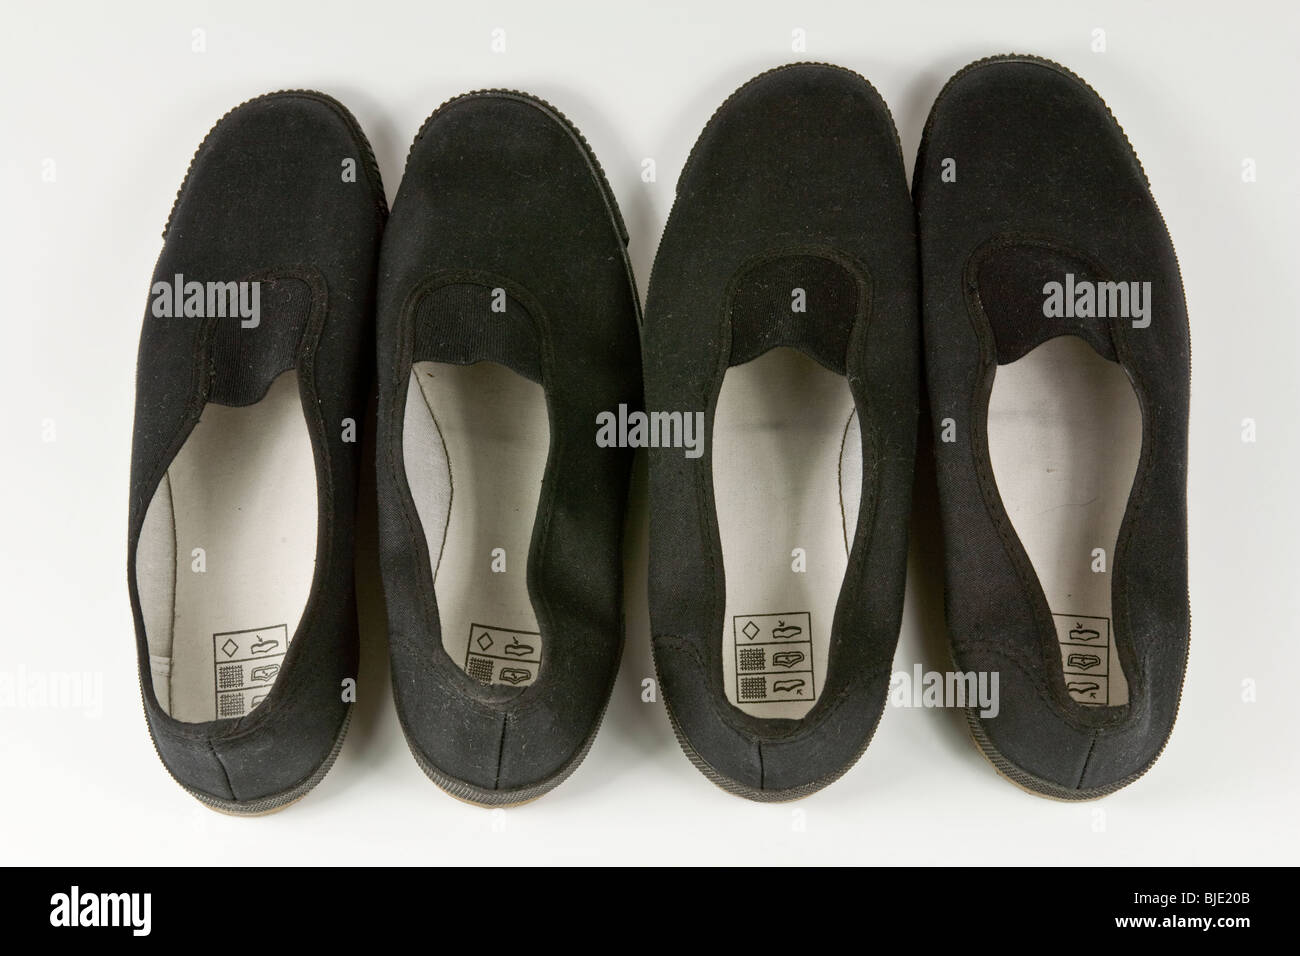 Plimsolls High Resolution Stock Photography and Images - Alamy